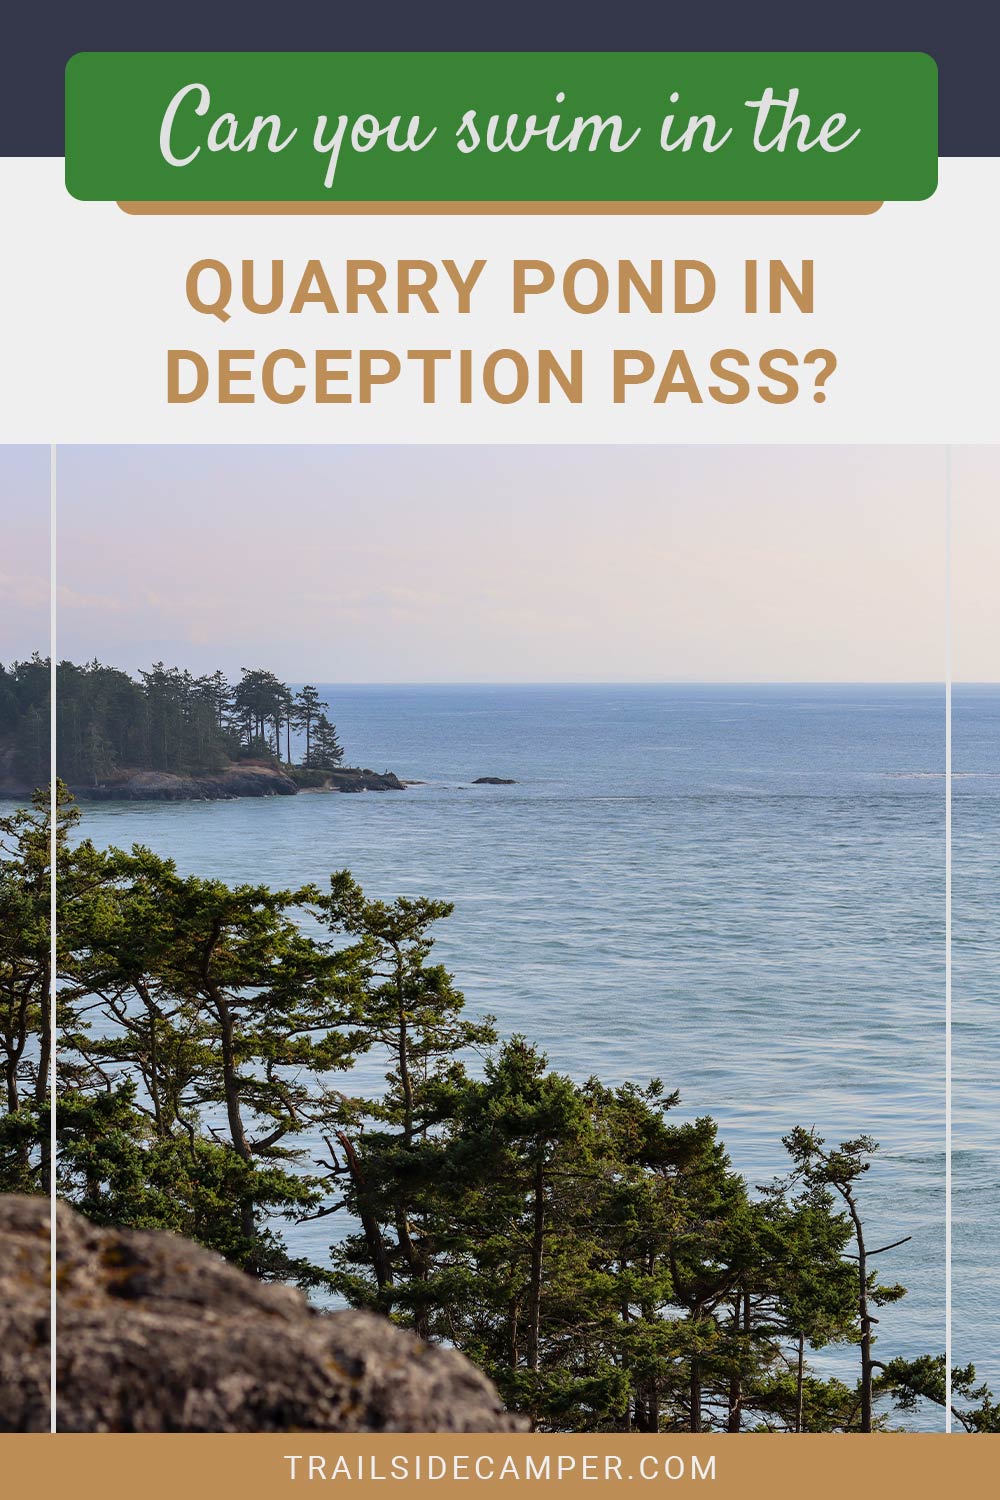 Can you swim in the Quarry Pond in Deception Pass?